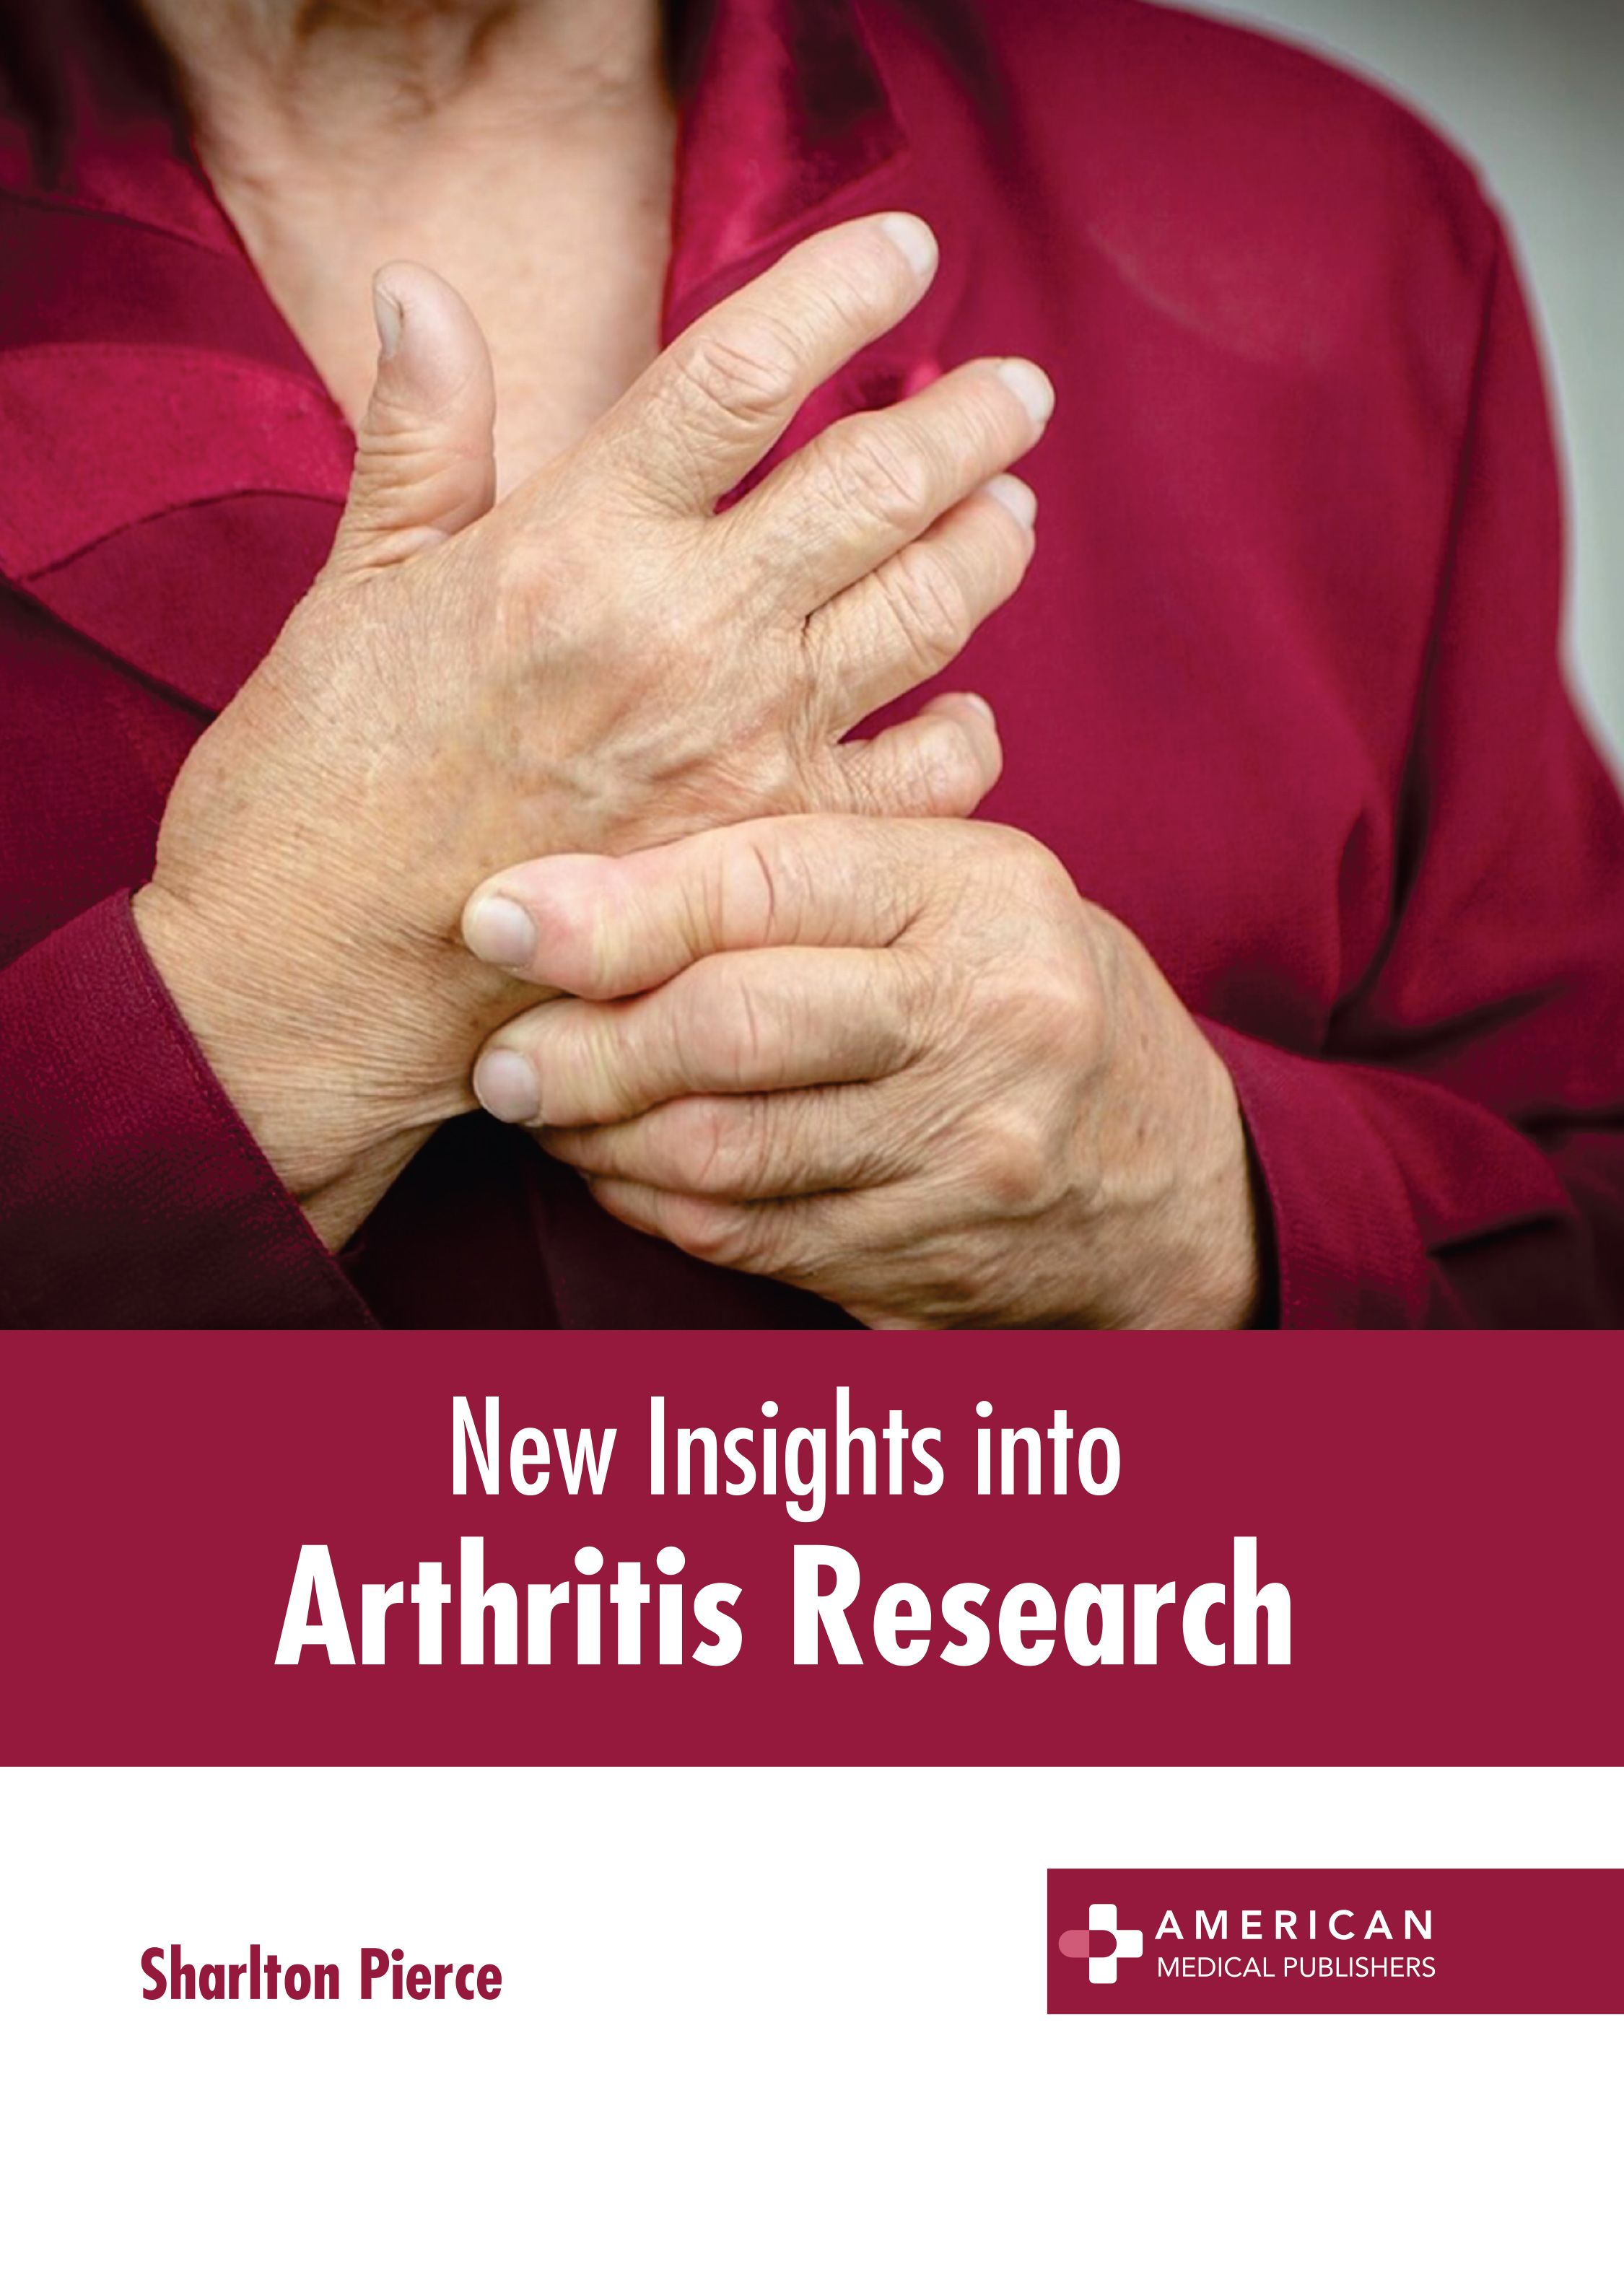 NEW INSIGHTS INTO ARTHRITIS RESEARCH